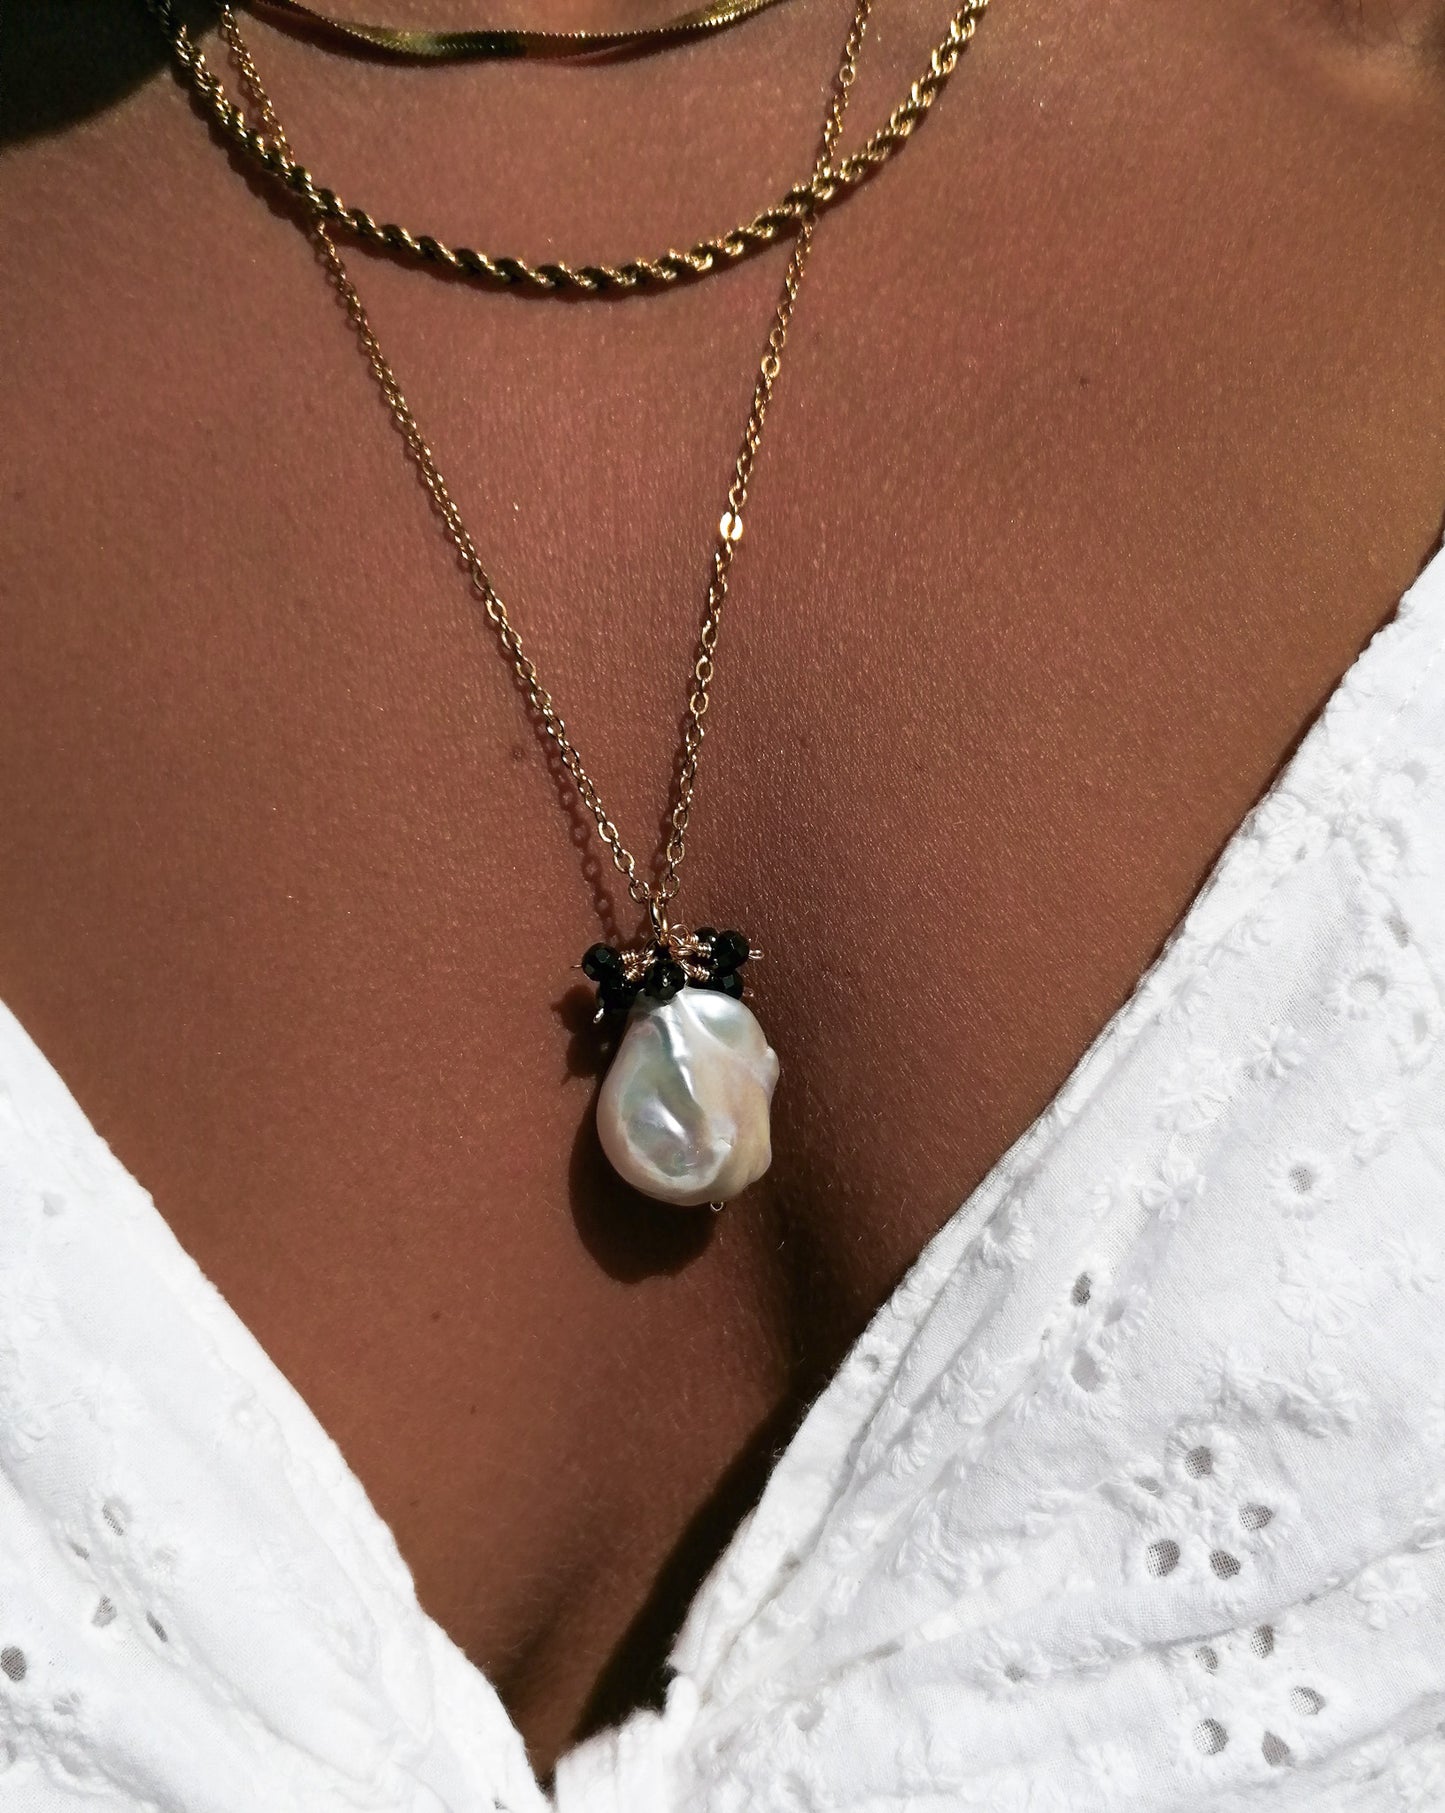 Extra large baroque pearl necklace